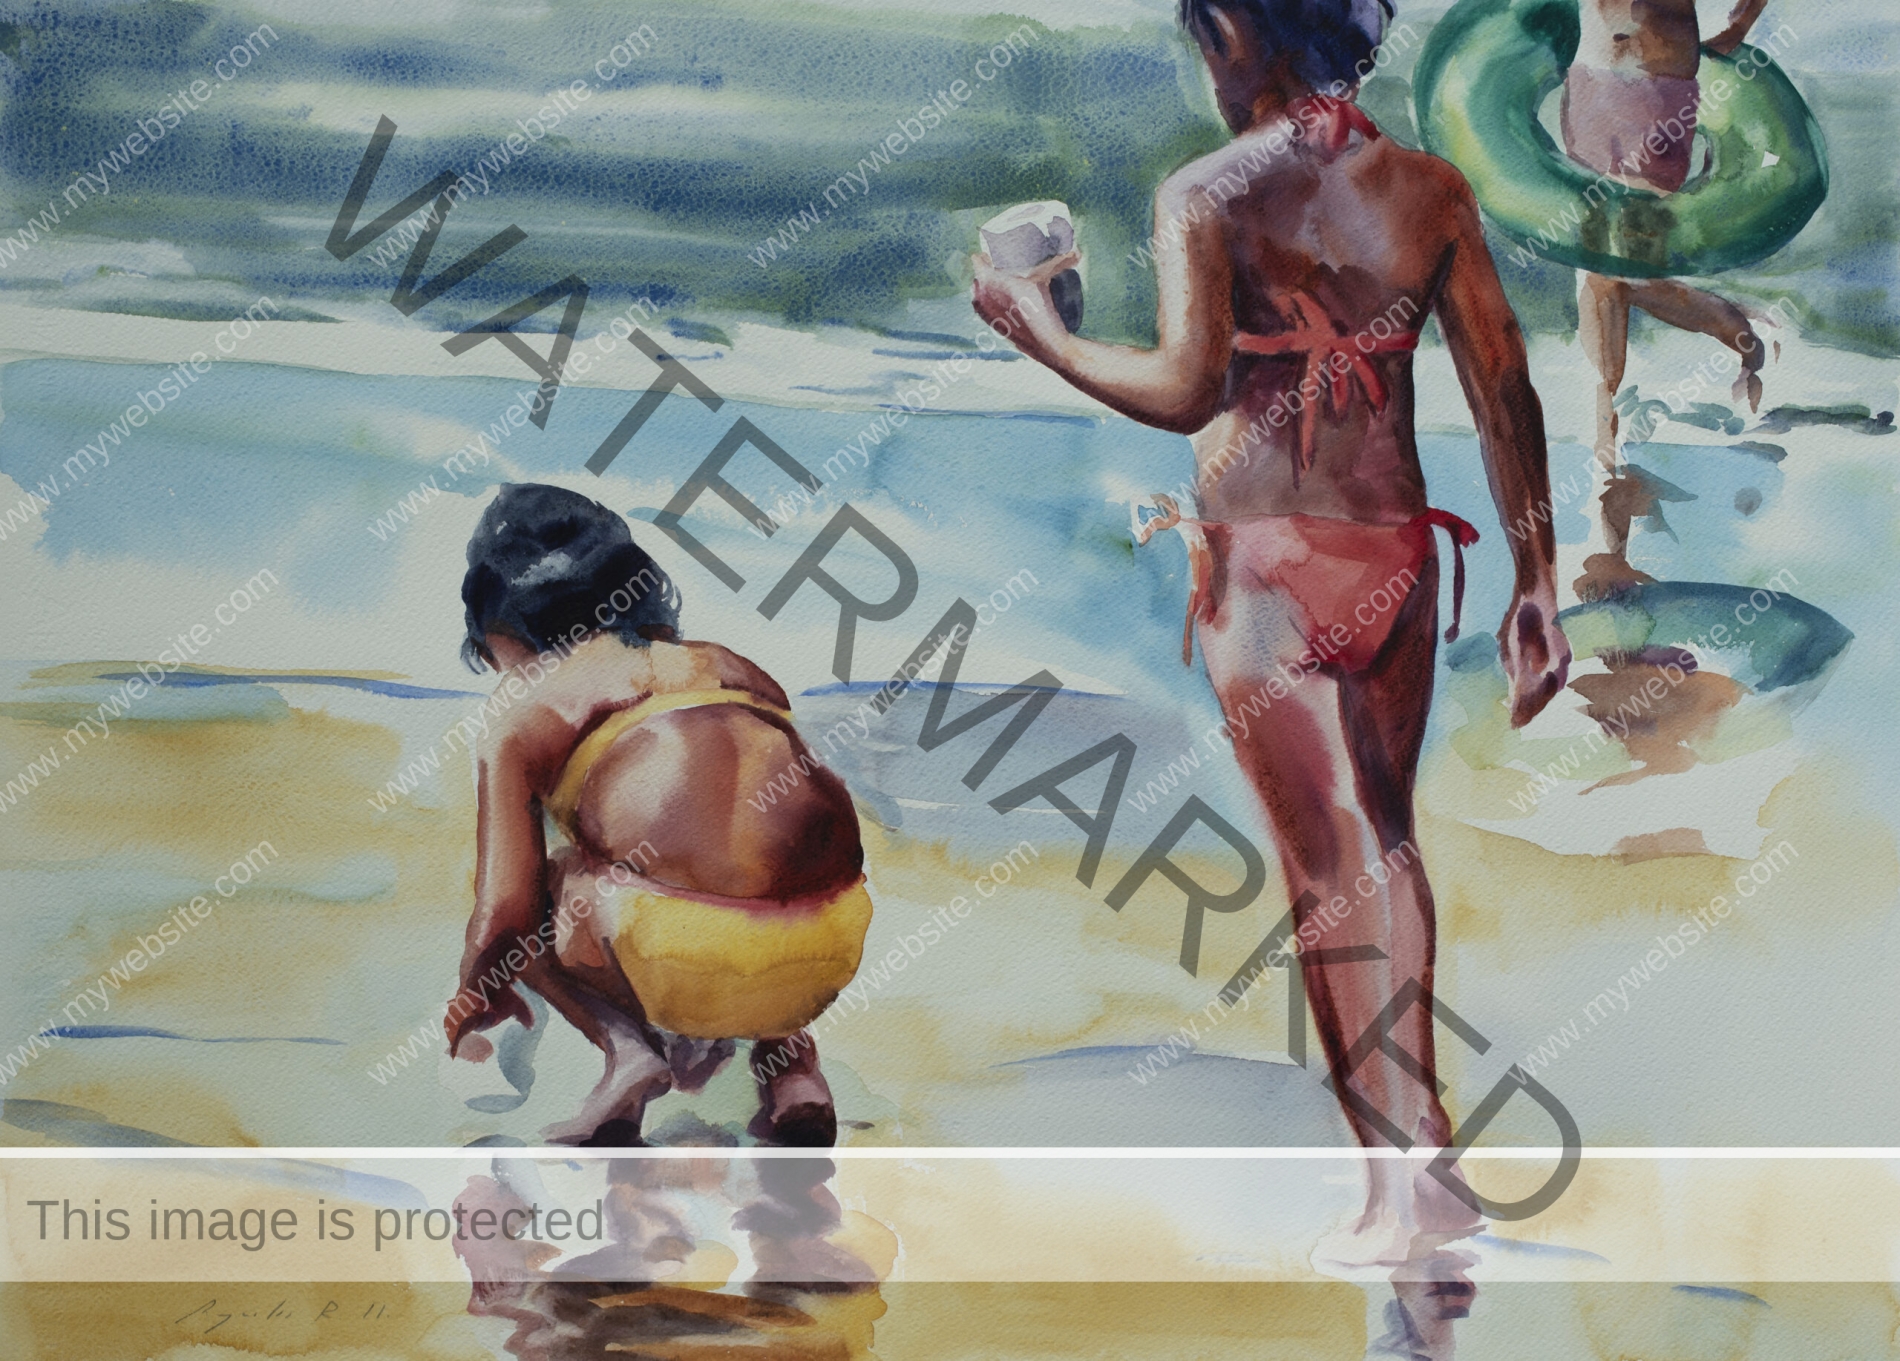 Colourful watercolour of three young girls playing on a beach in their bathing suit. By Adrián Arguedas. Costa Rica Watercolour painting